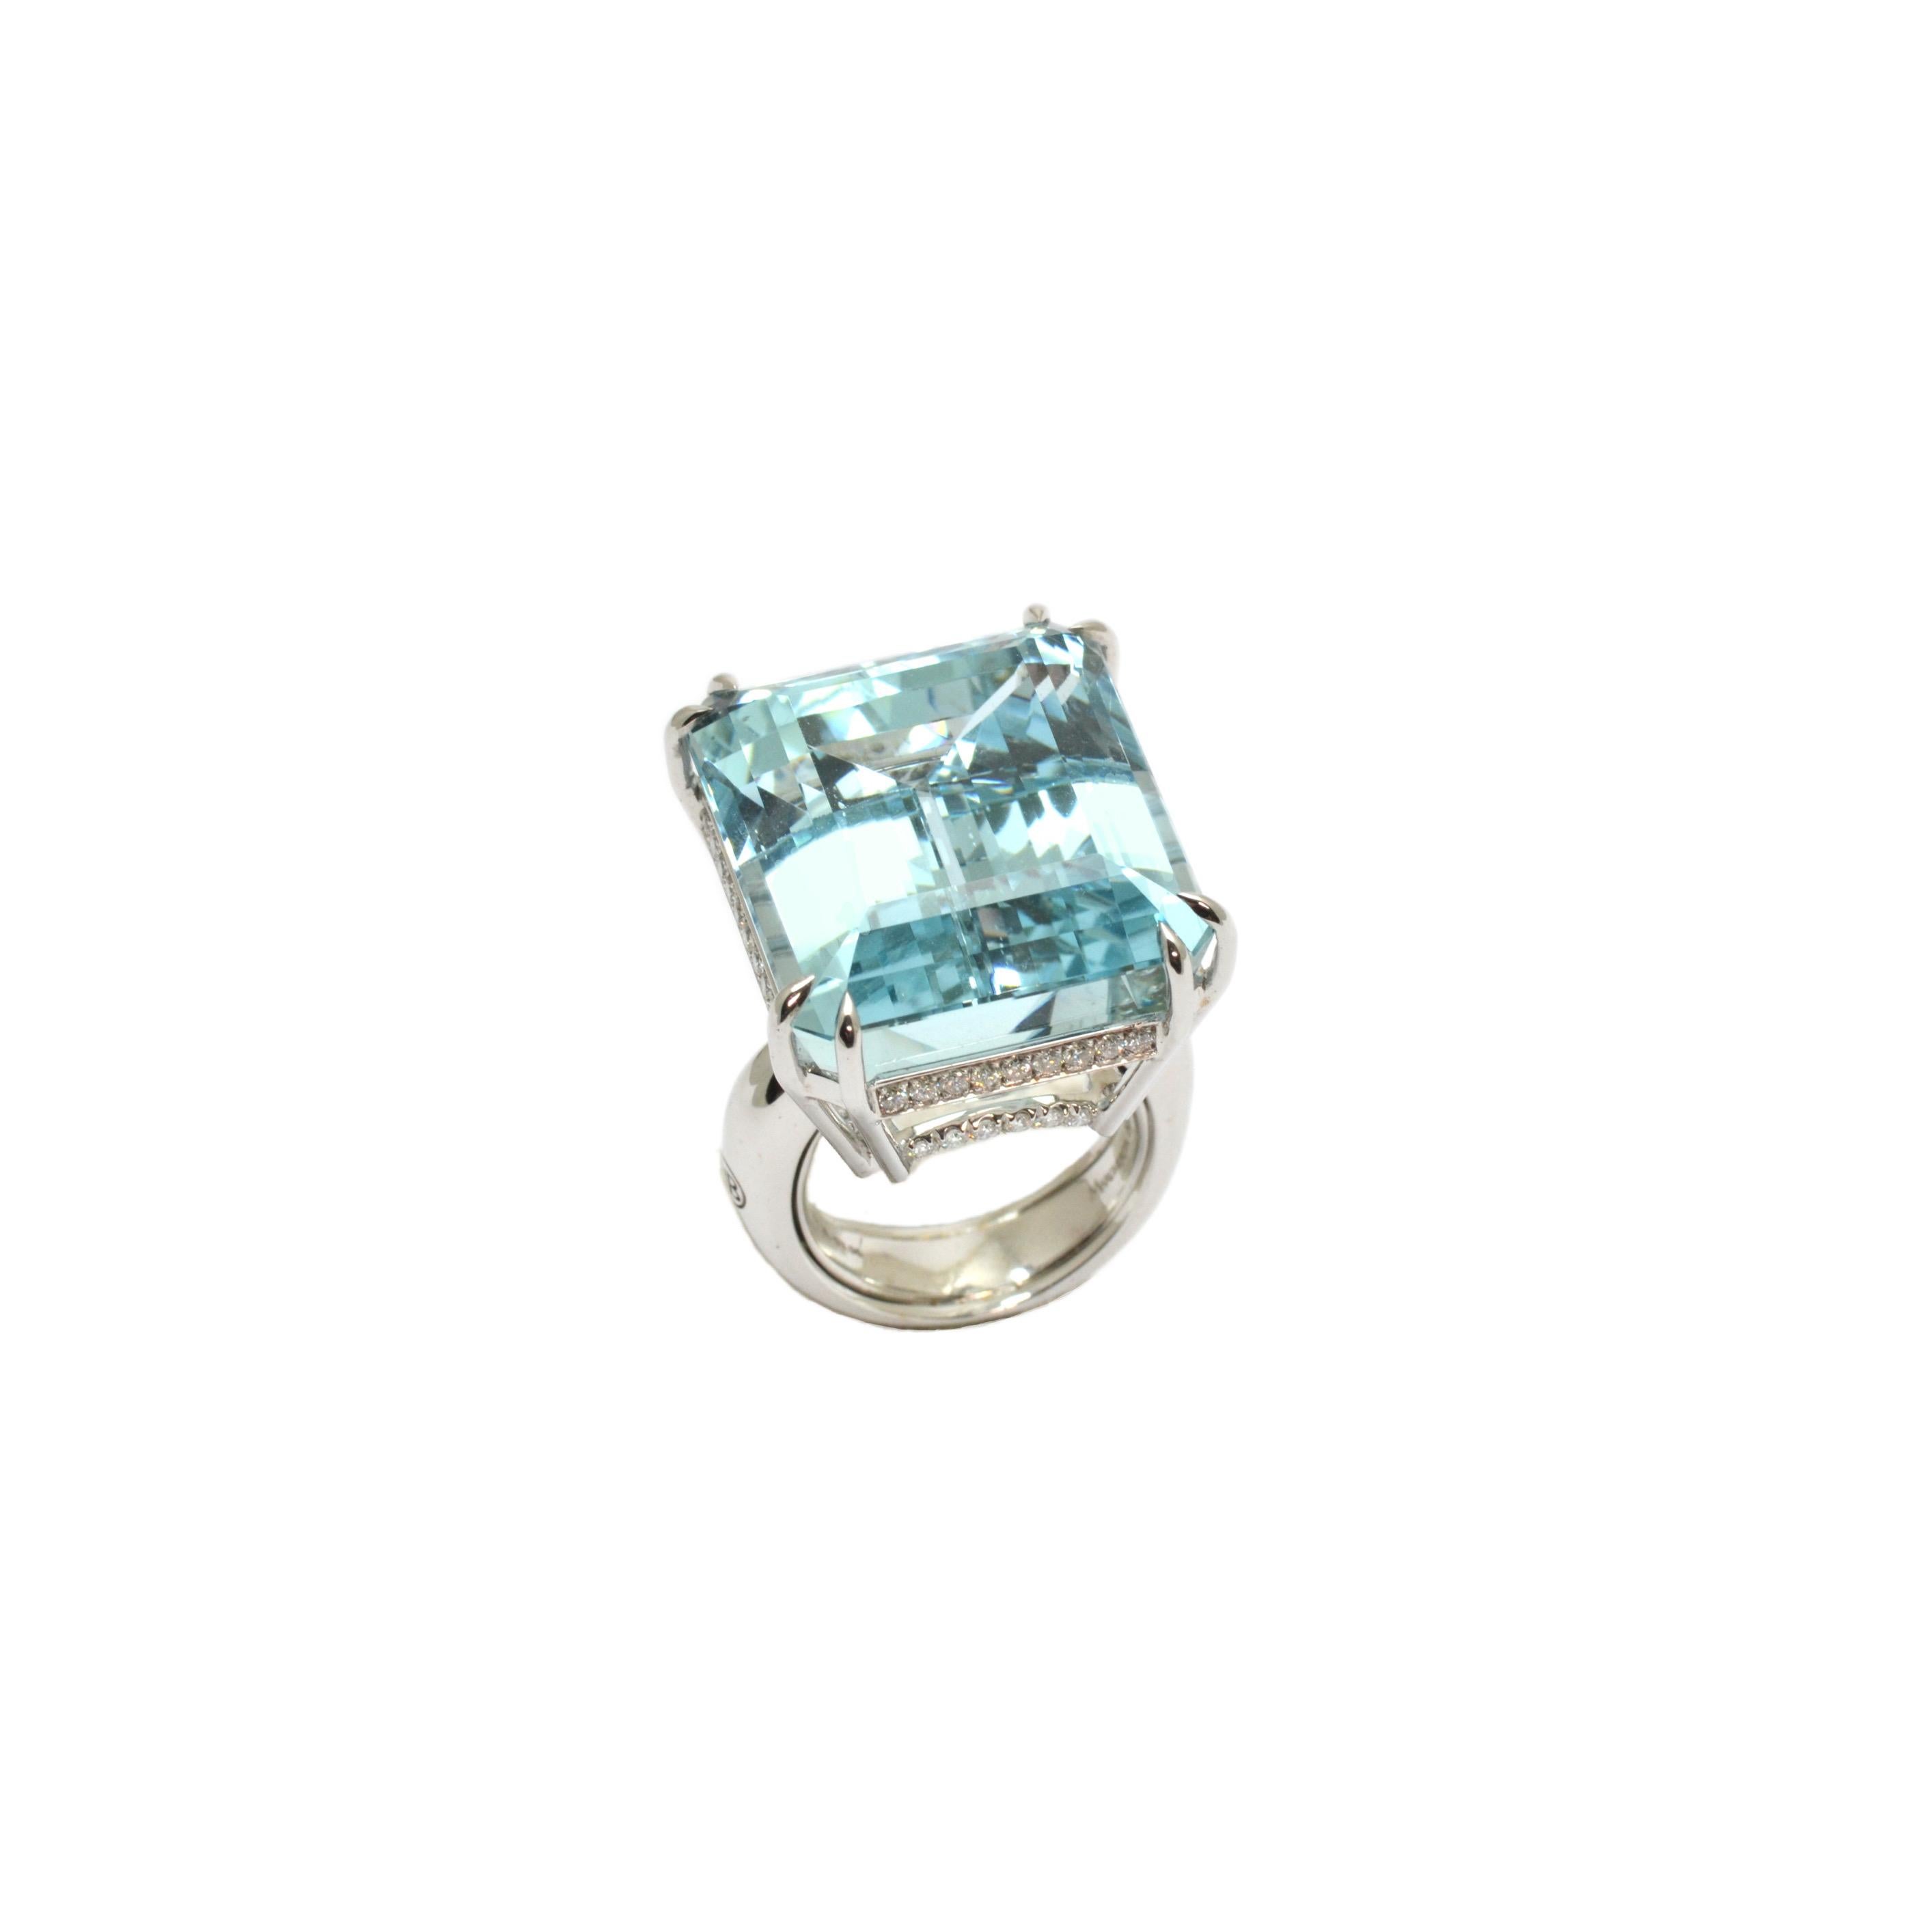 Centering an impressive 53.96 carat octagonal aquamarine, from Brazil, the ring designed and signed Margherita Burgener is a beautiful evergreen cocktail ring.
The shanks are well bombé shaped outside, inside it has a spring that help the ring to